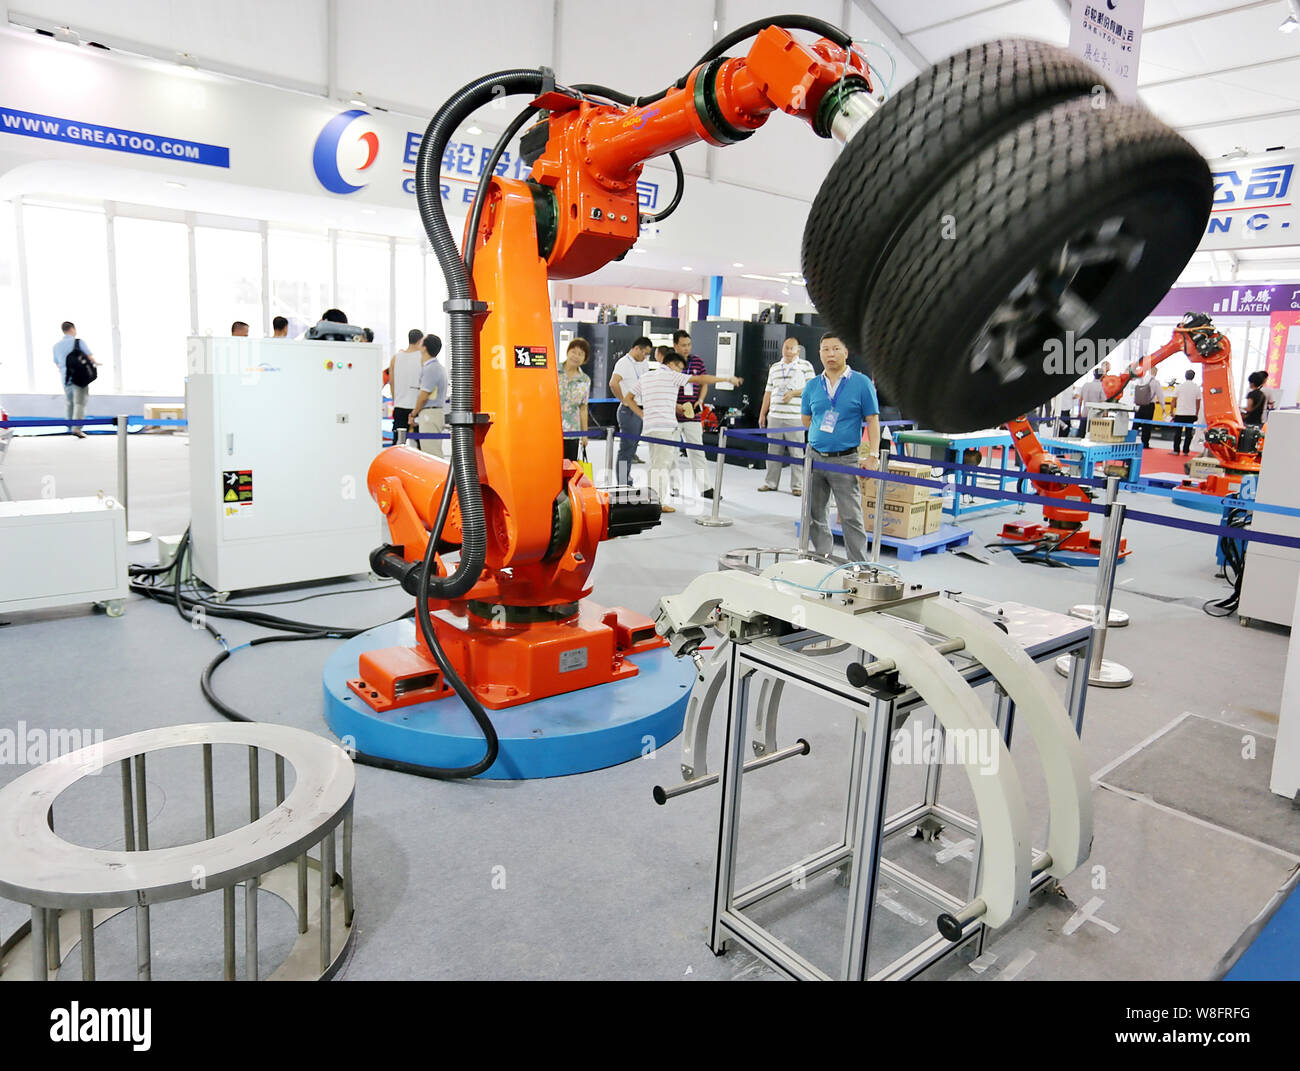 FILE--A robot arm demonstrates lifting tires an expo in city, south China's Guangdong province, 11 2015. For decades, manufactu Stock Photo - Alamy